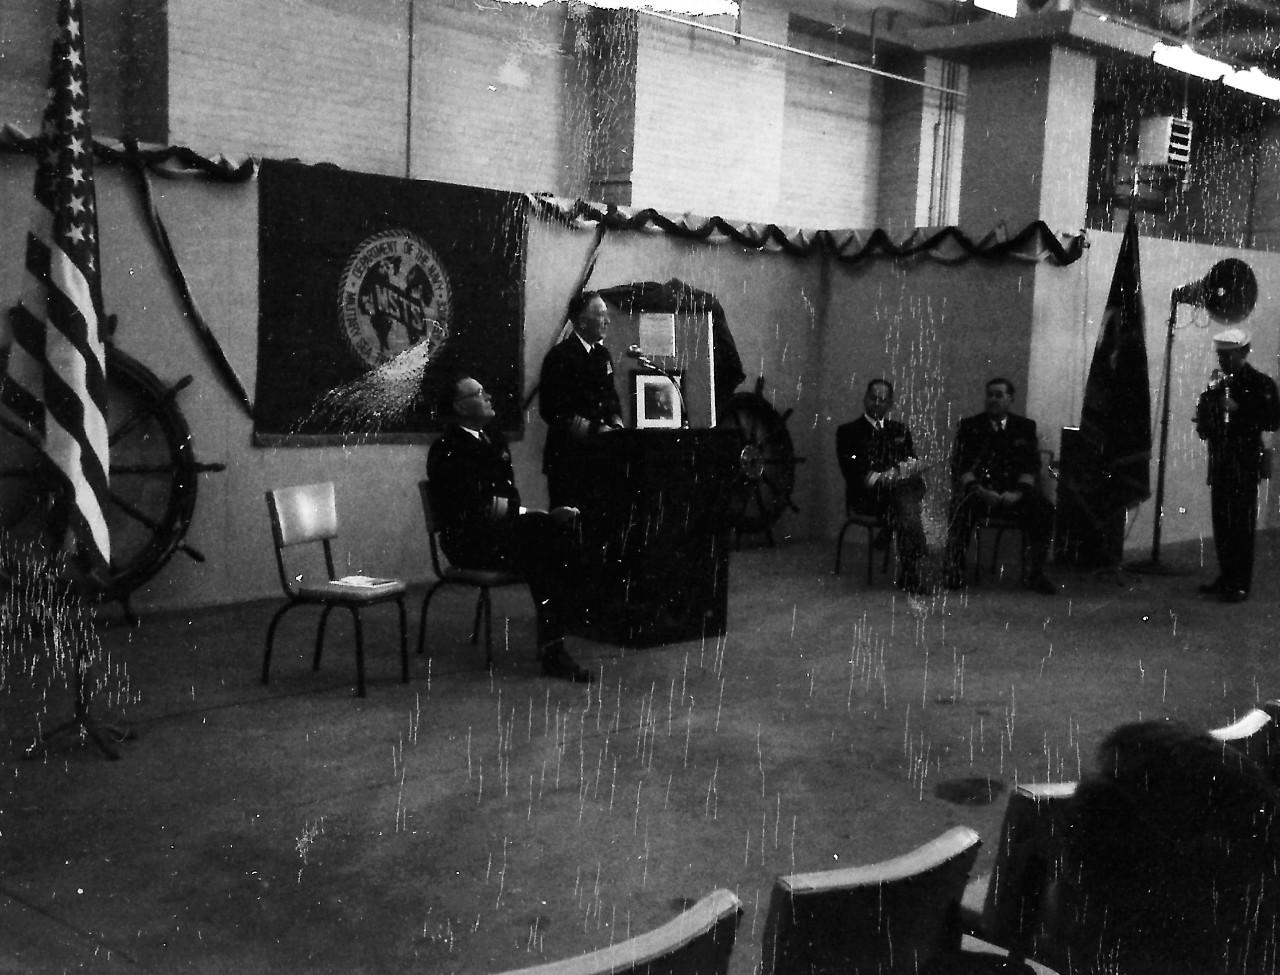 NMUSN-19:   USNS James M. Gilliss presentation at Naval Historical Display Center, Washington Navy Yard, Washington, D.C. December 14, 1962.    Vice Admiral Roay A. Gano, USN, gives remarks during the presentation at the Naval Historical Display Center (now the National Museum of the U.S. Navy).    Rear Admiral Arthur R. Gralla and Captain Slade D. Cutter are to the right.  This presentation was the first official ceremony held at the Display Center.    The director at the time was World War II veteran, Captain Slade. D. Cutter, USN.  National Museum of the U.S. Navy Photograph Collection.    